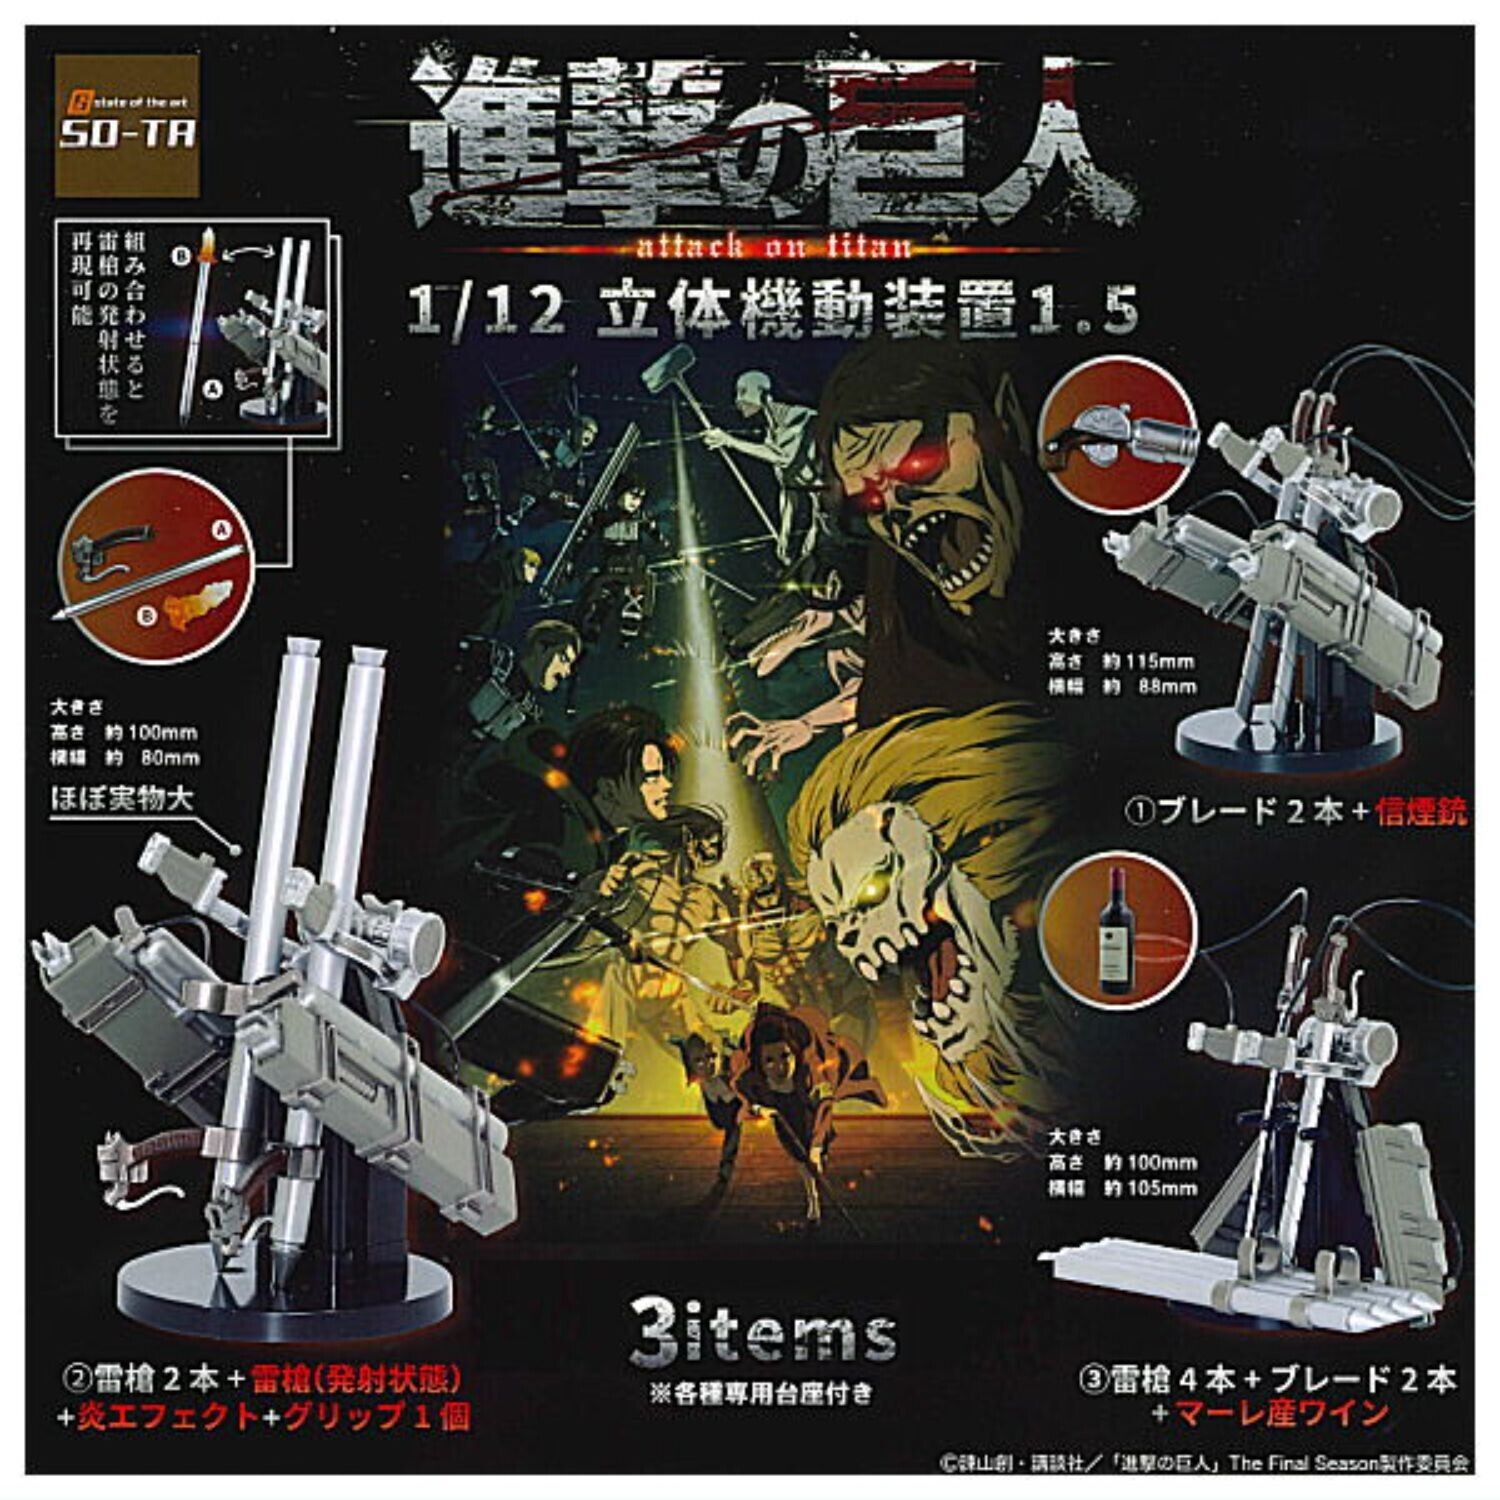 Attack on Titan 1/12 Omni-directional mobility gear Capsule Toy 3 Types Comp Set